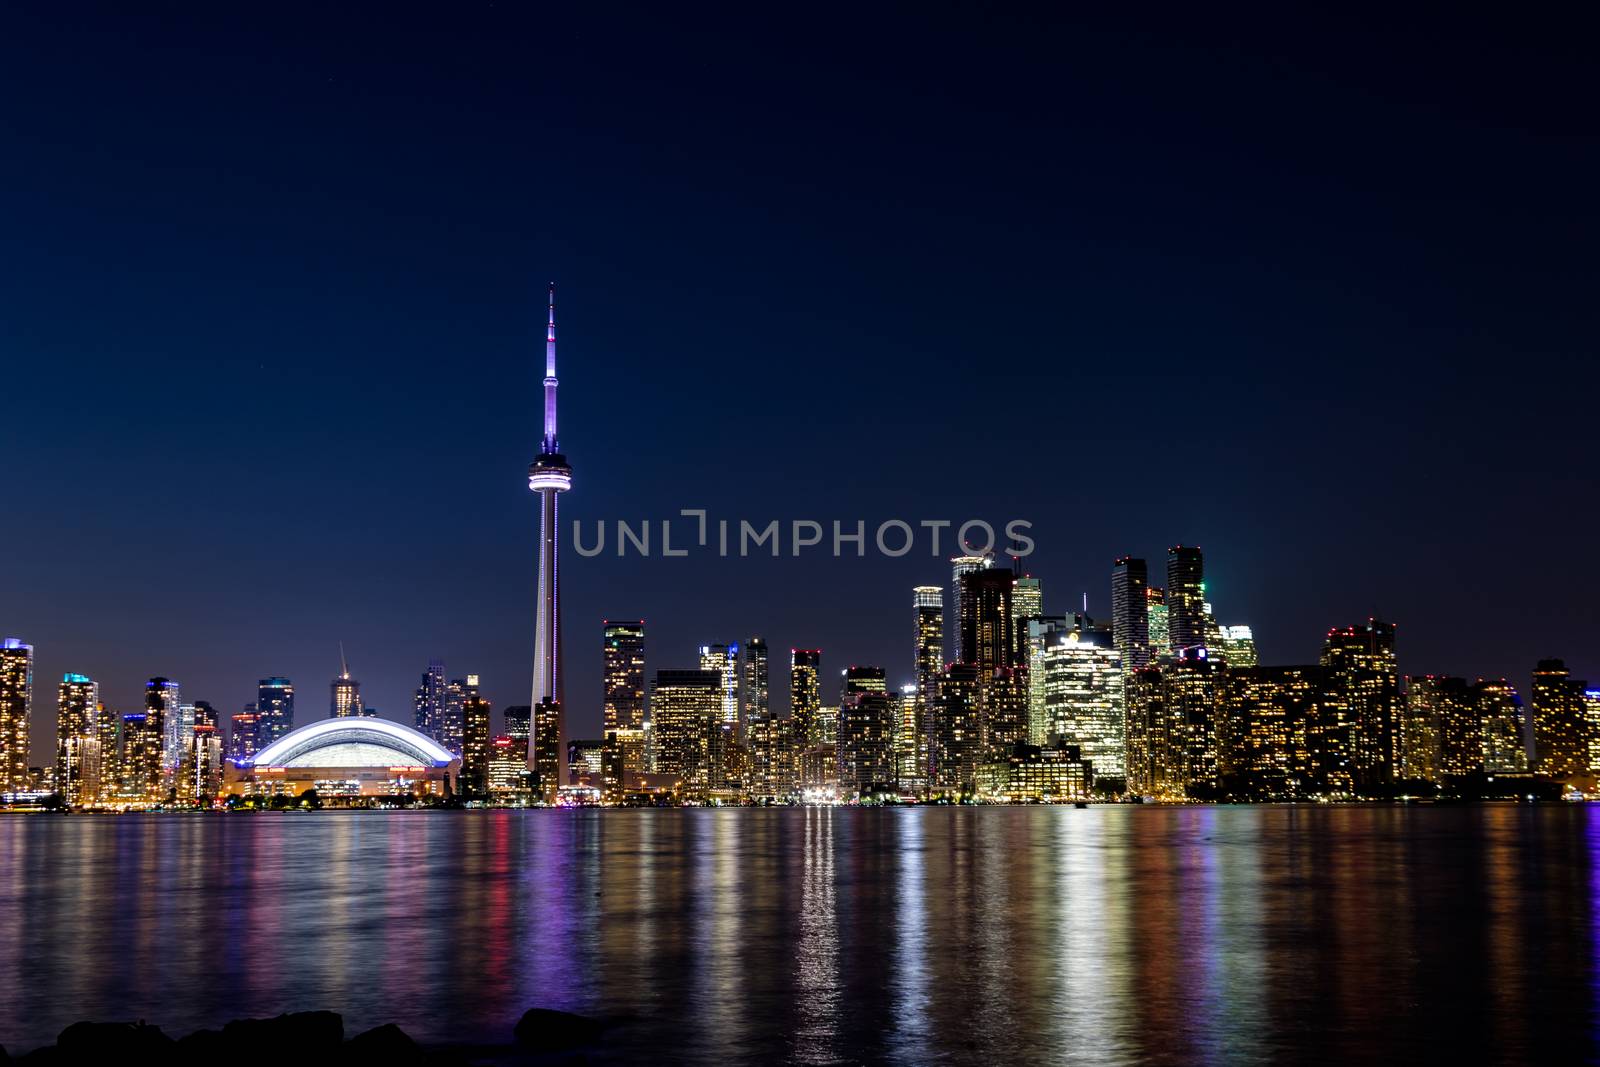 Night View of Downtown Toronto from Toronto Islands with the Lake Ontario, Canada.